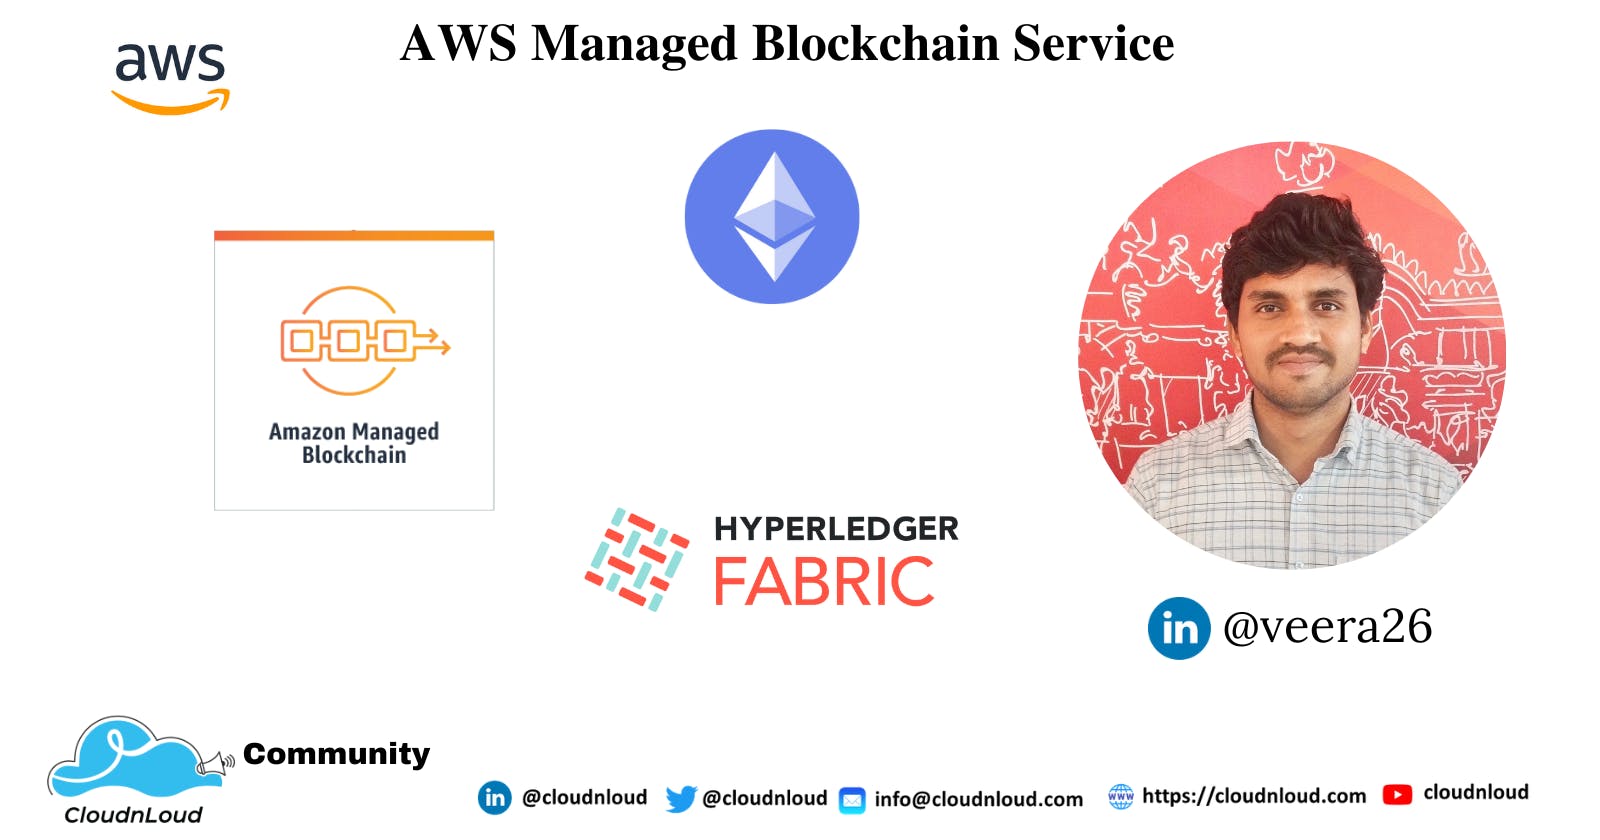 Why Your Business Should Consider AWS Managed Blockchain